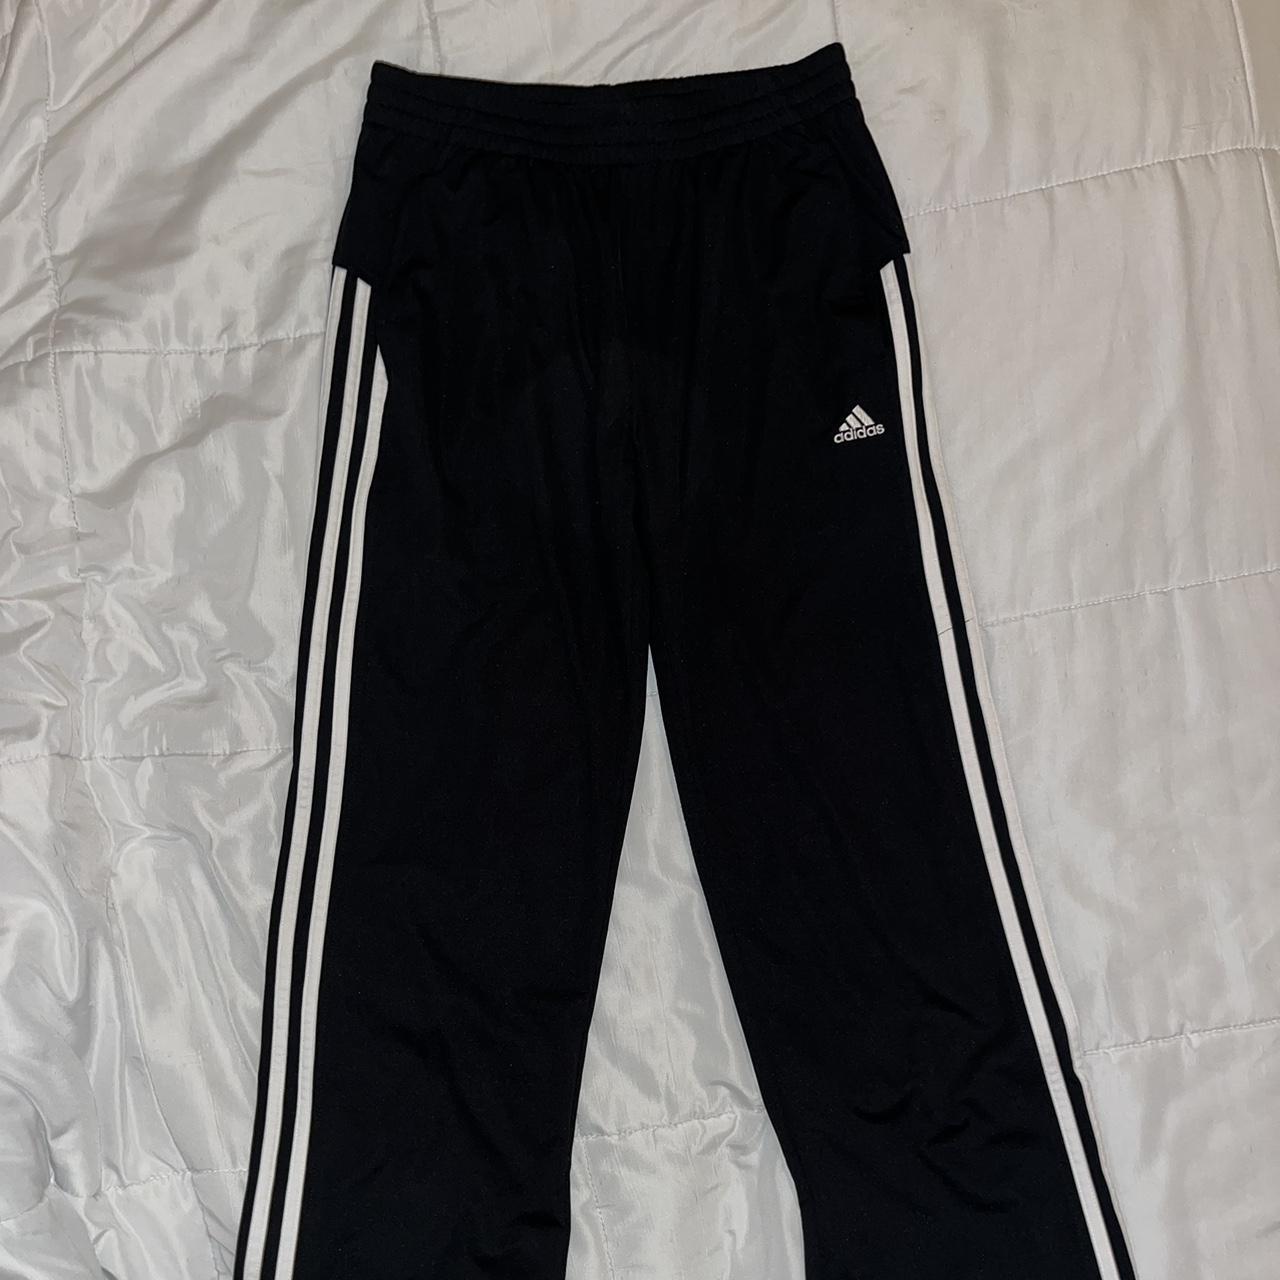 adidas Men's Team Issue tapered pants